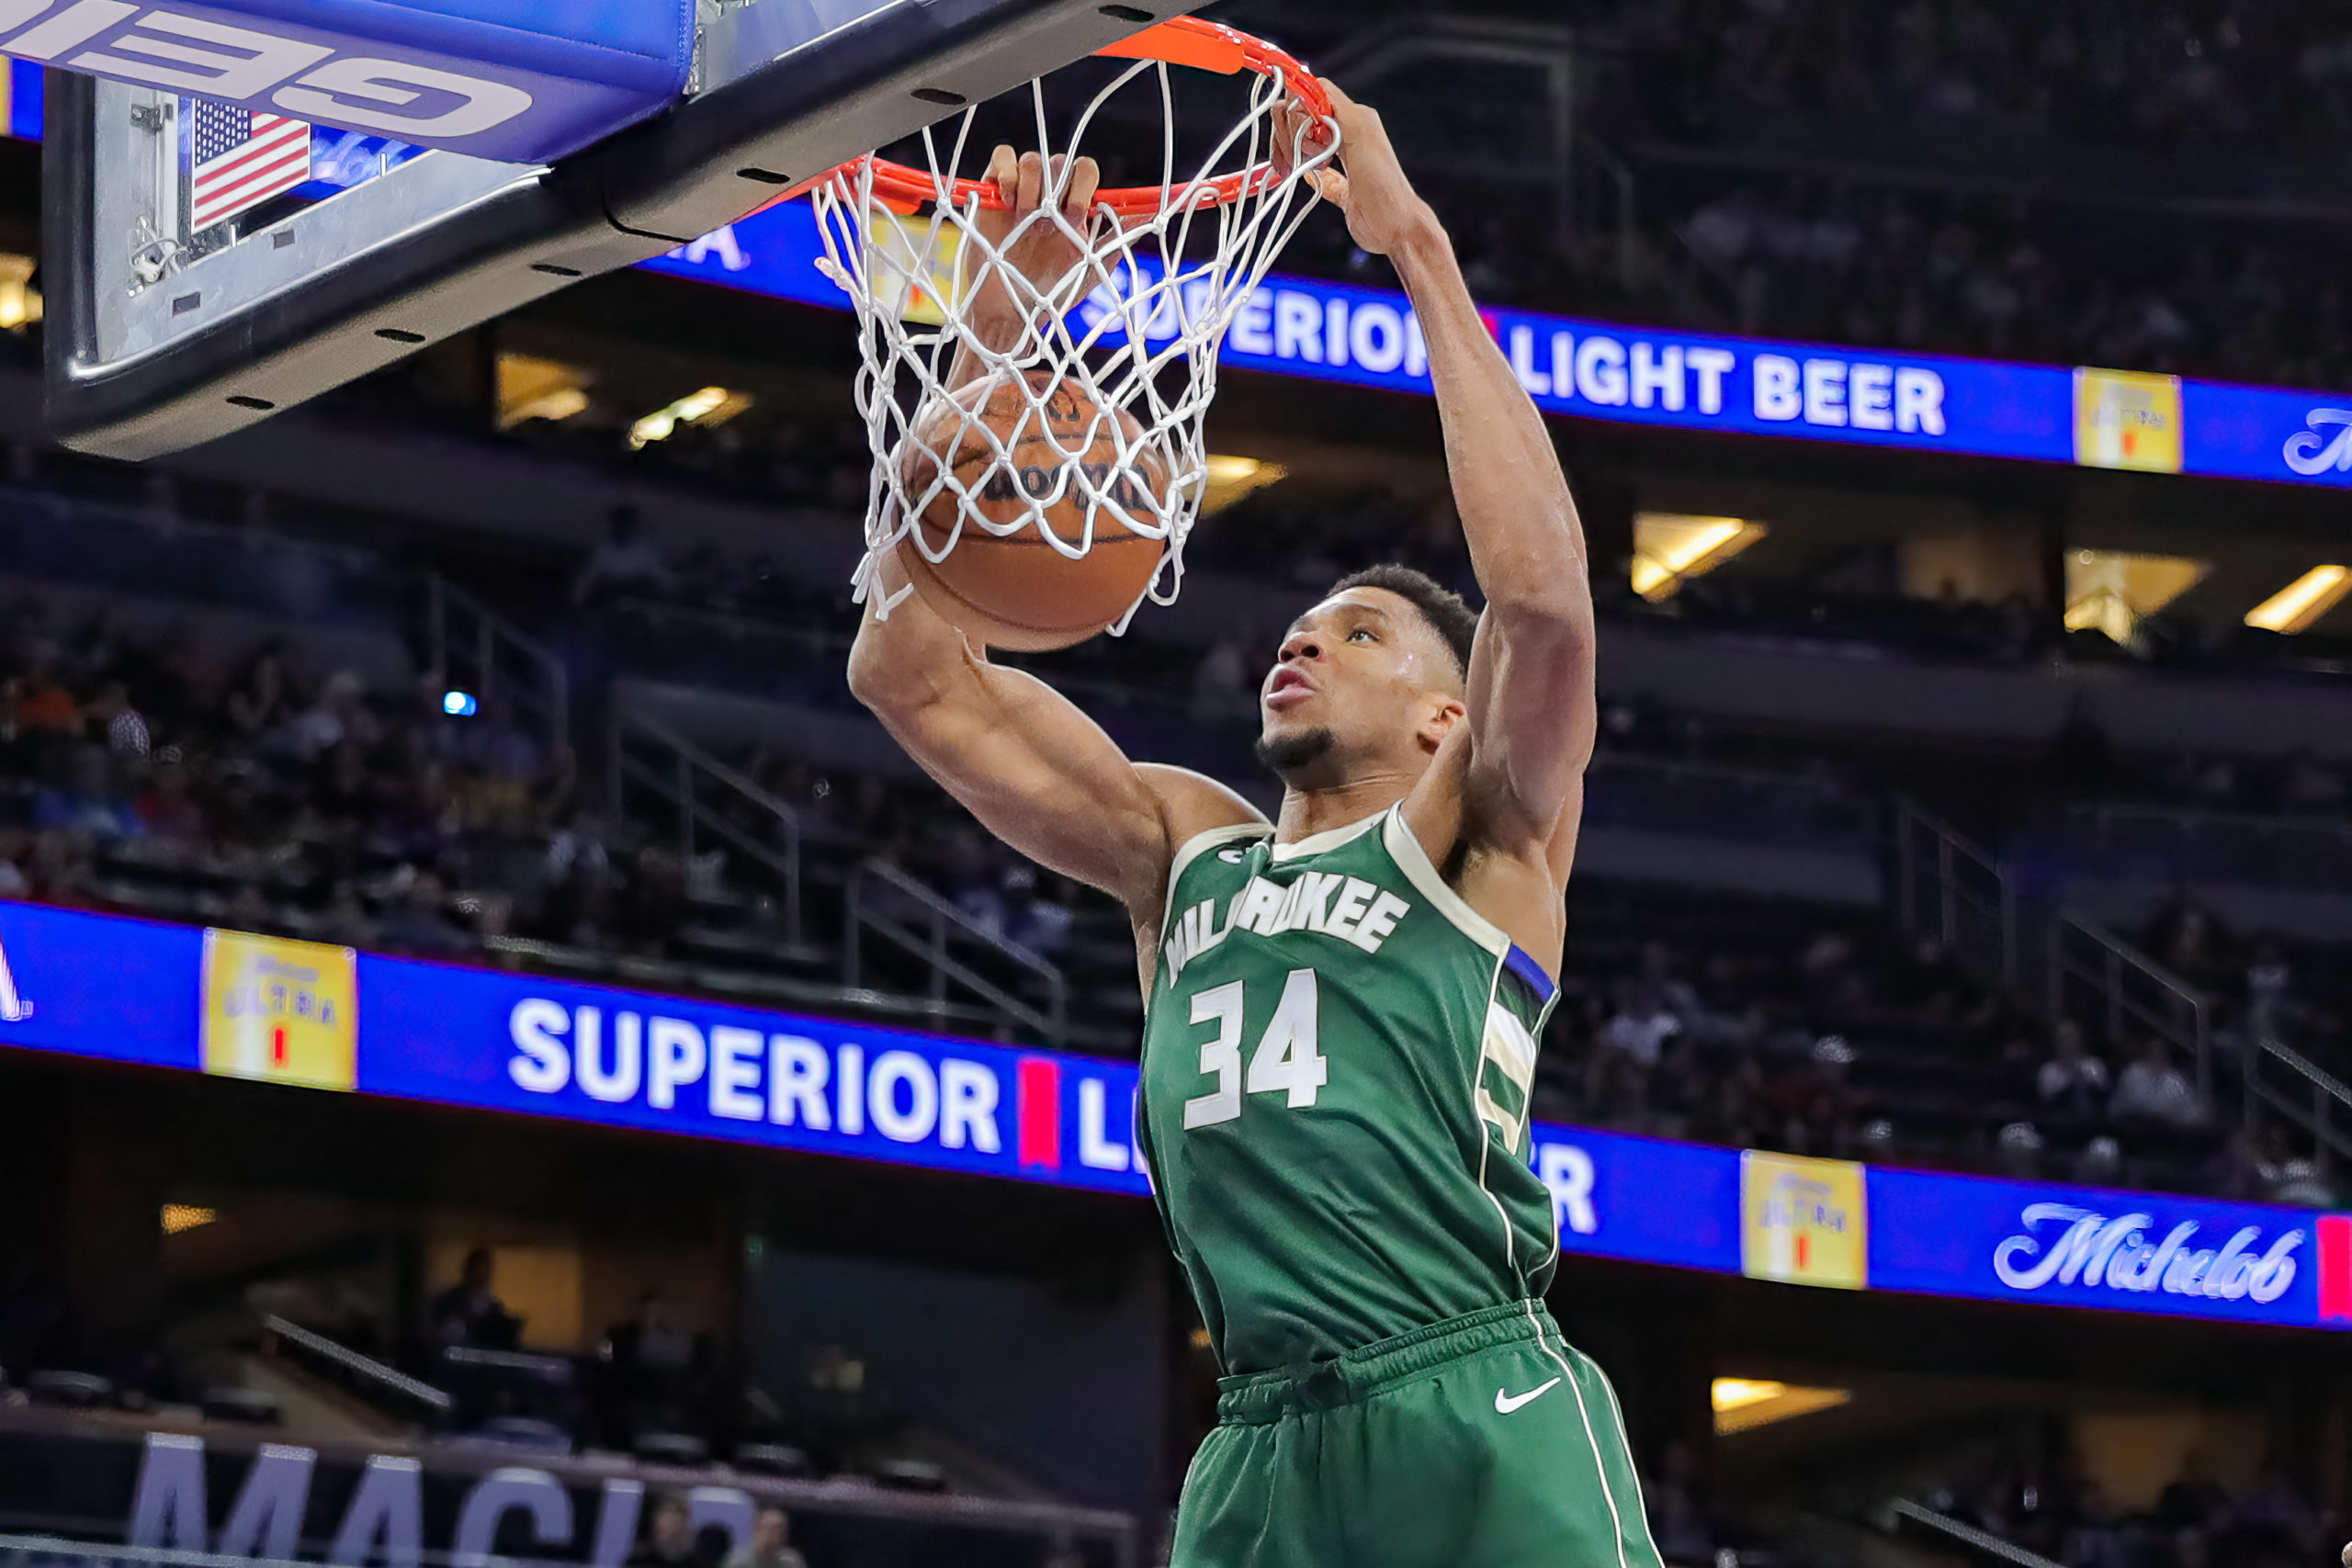 Milwaukee Bucks forward Giannis Antetokounmpo (34) made a dunk against the Orlando Magic in the second half at Amway Center. 